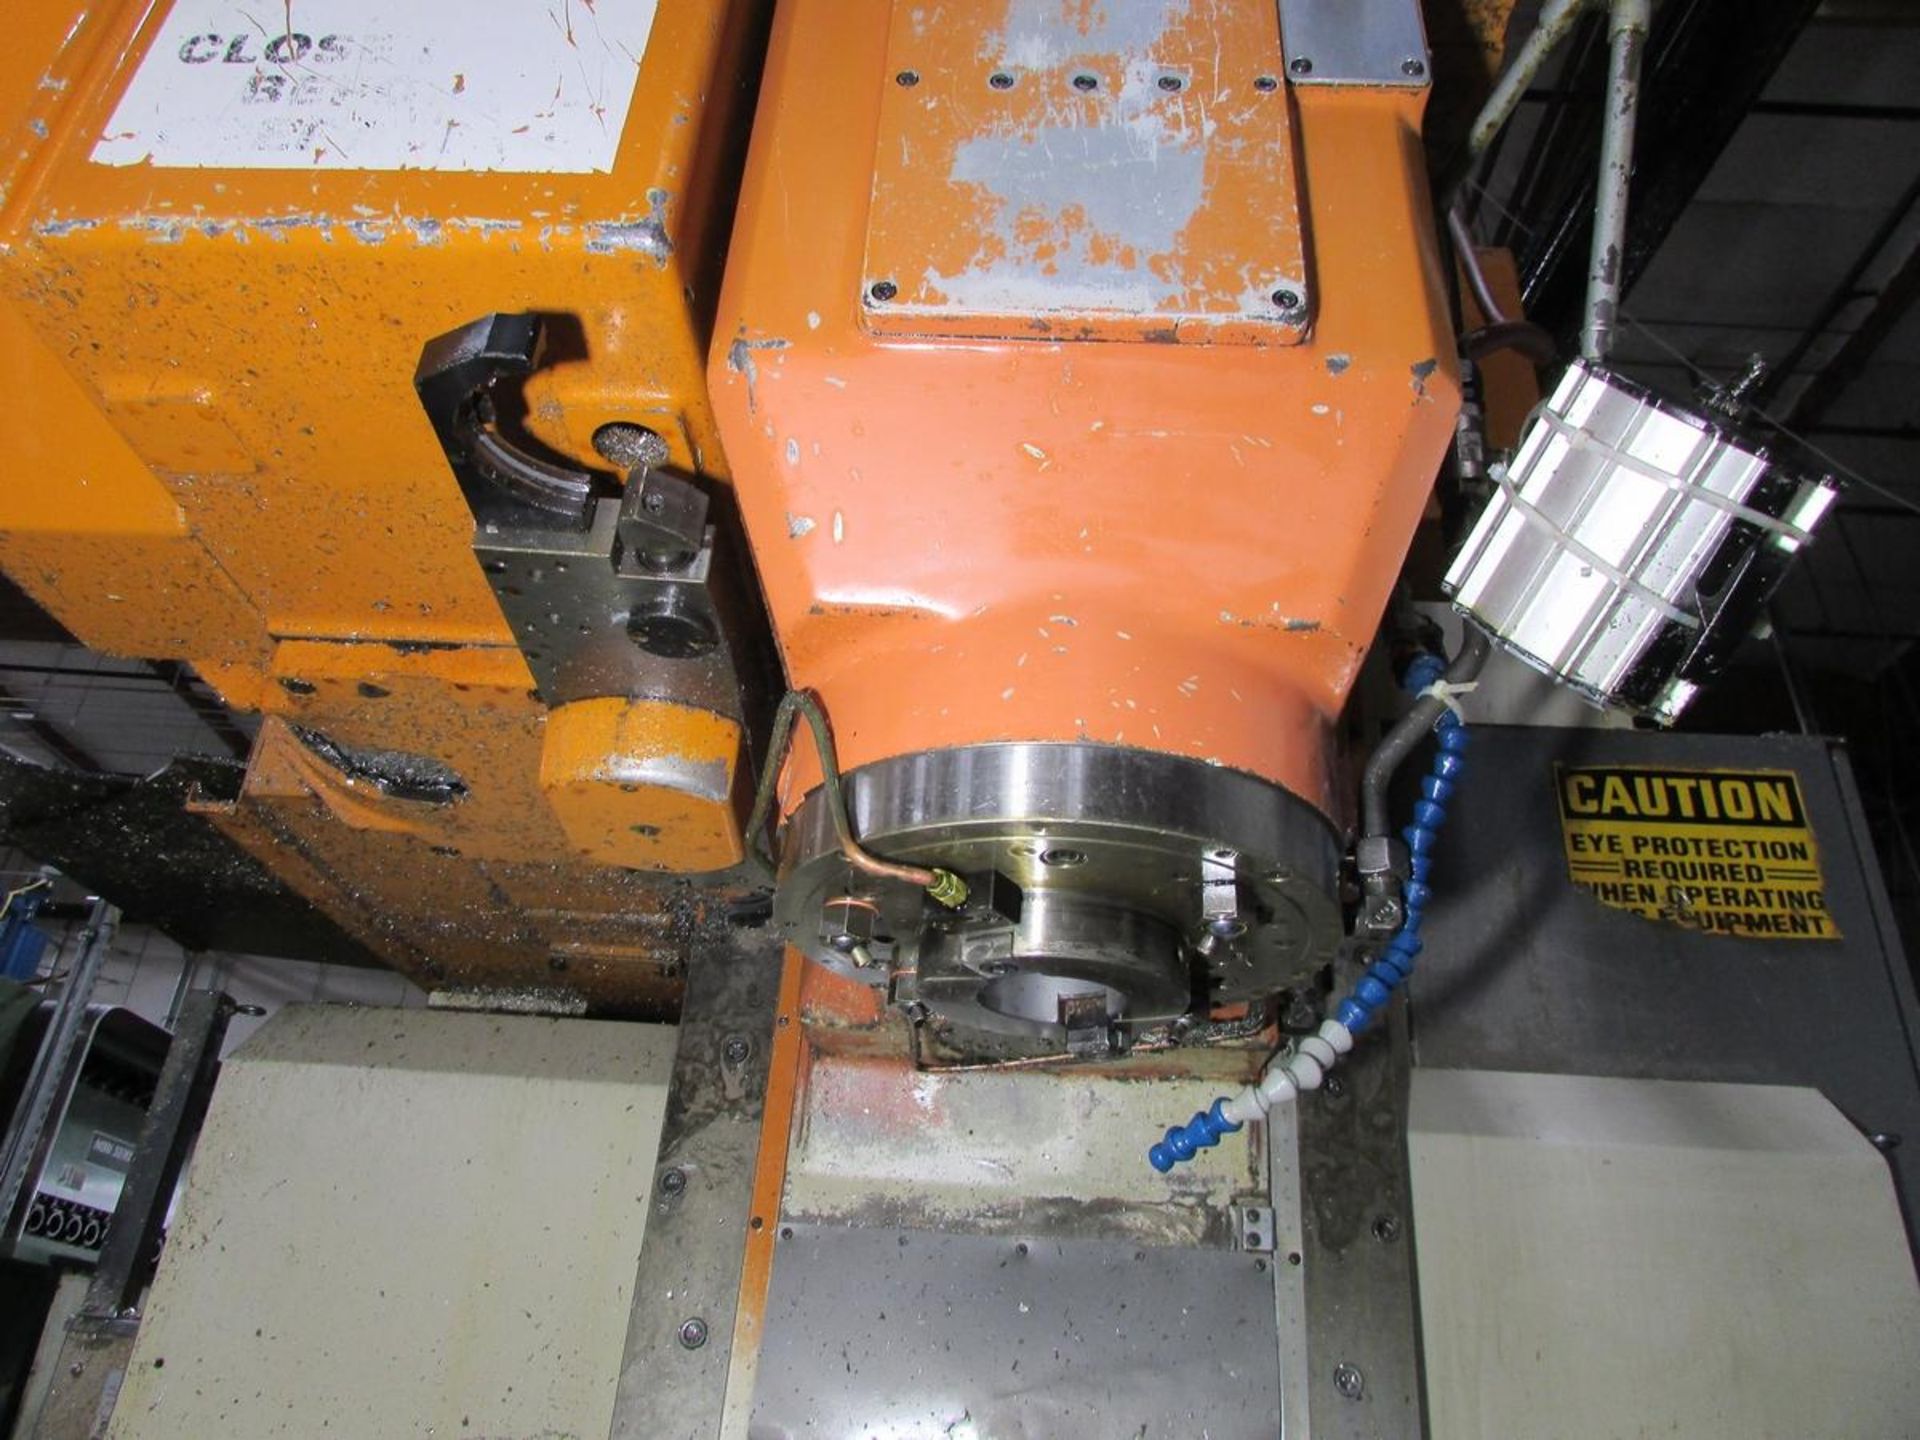 LeBlond Makino FNC106-A30 3-Axis CNC Vertical Maching Center - Image 8 of 25